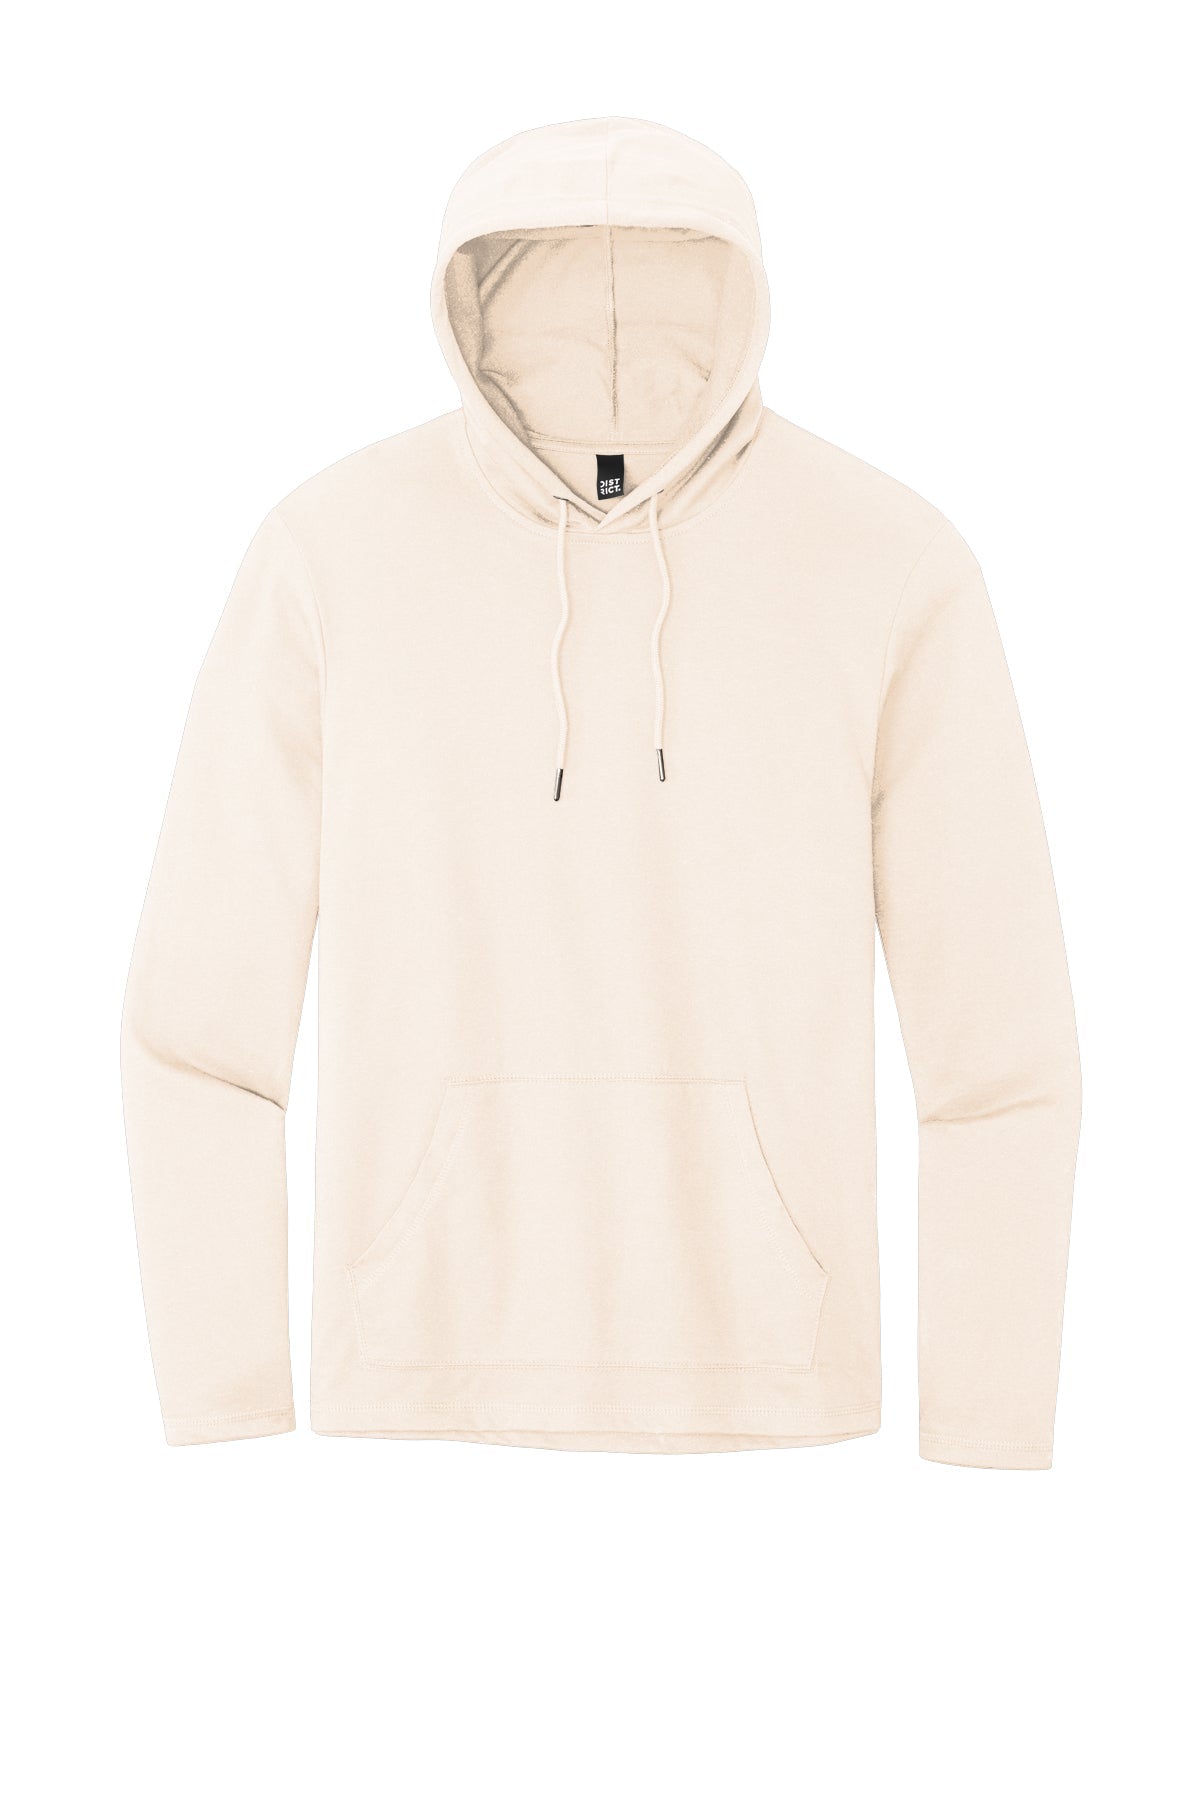 DT571 District ® Featherweight French Terry ™ Hoodie